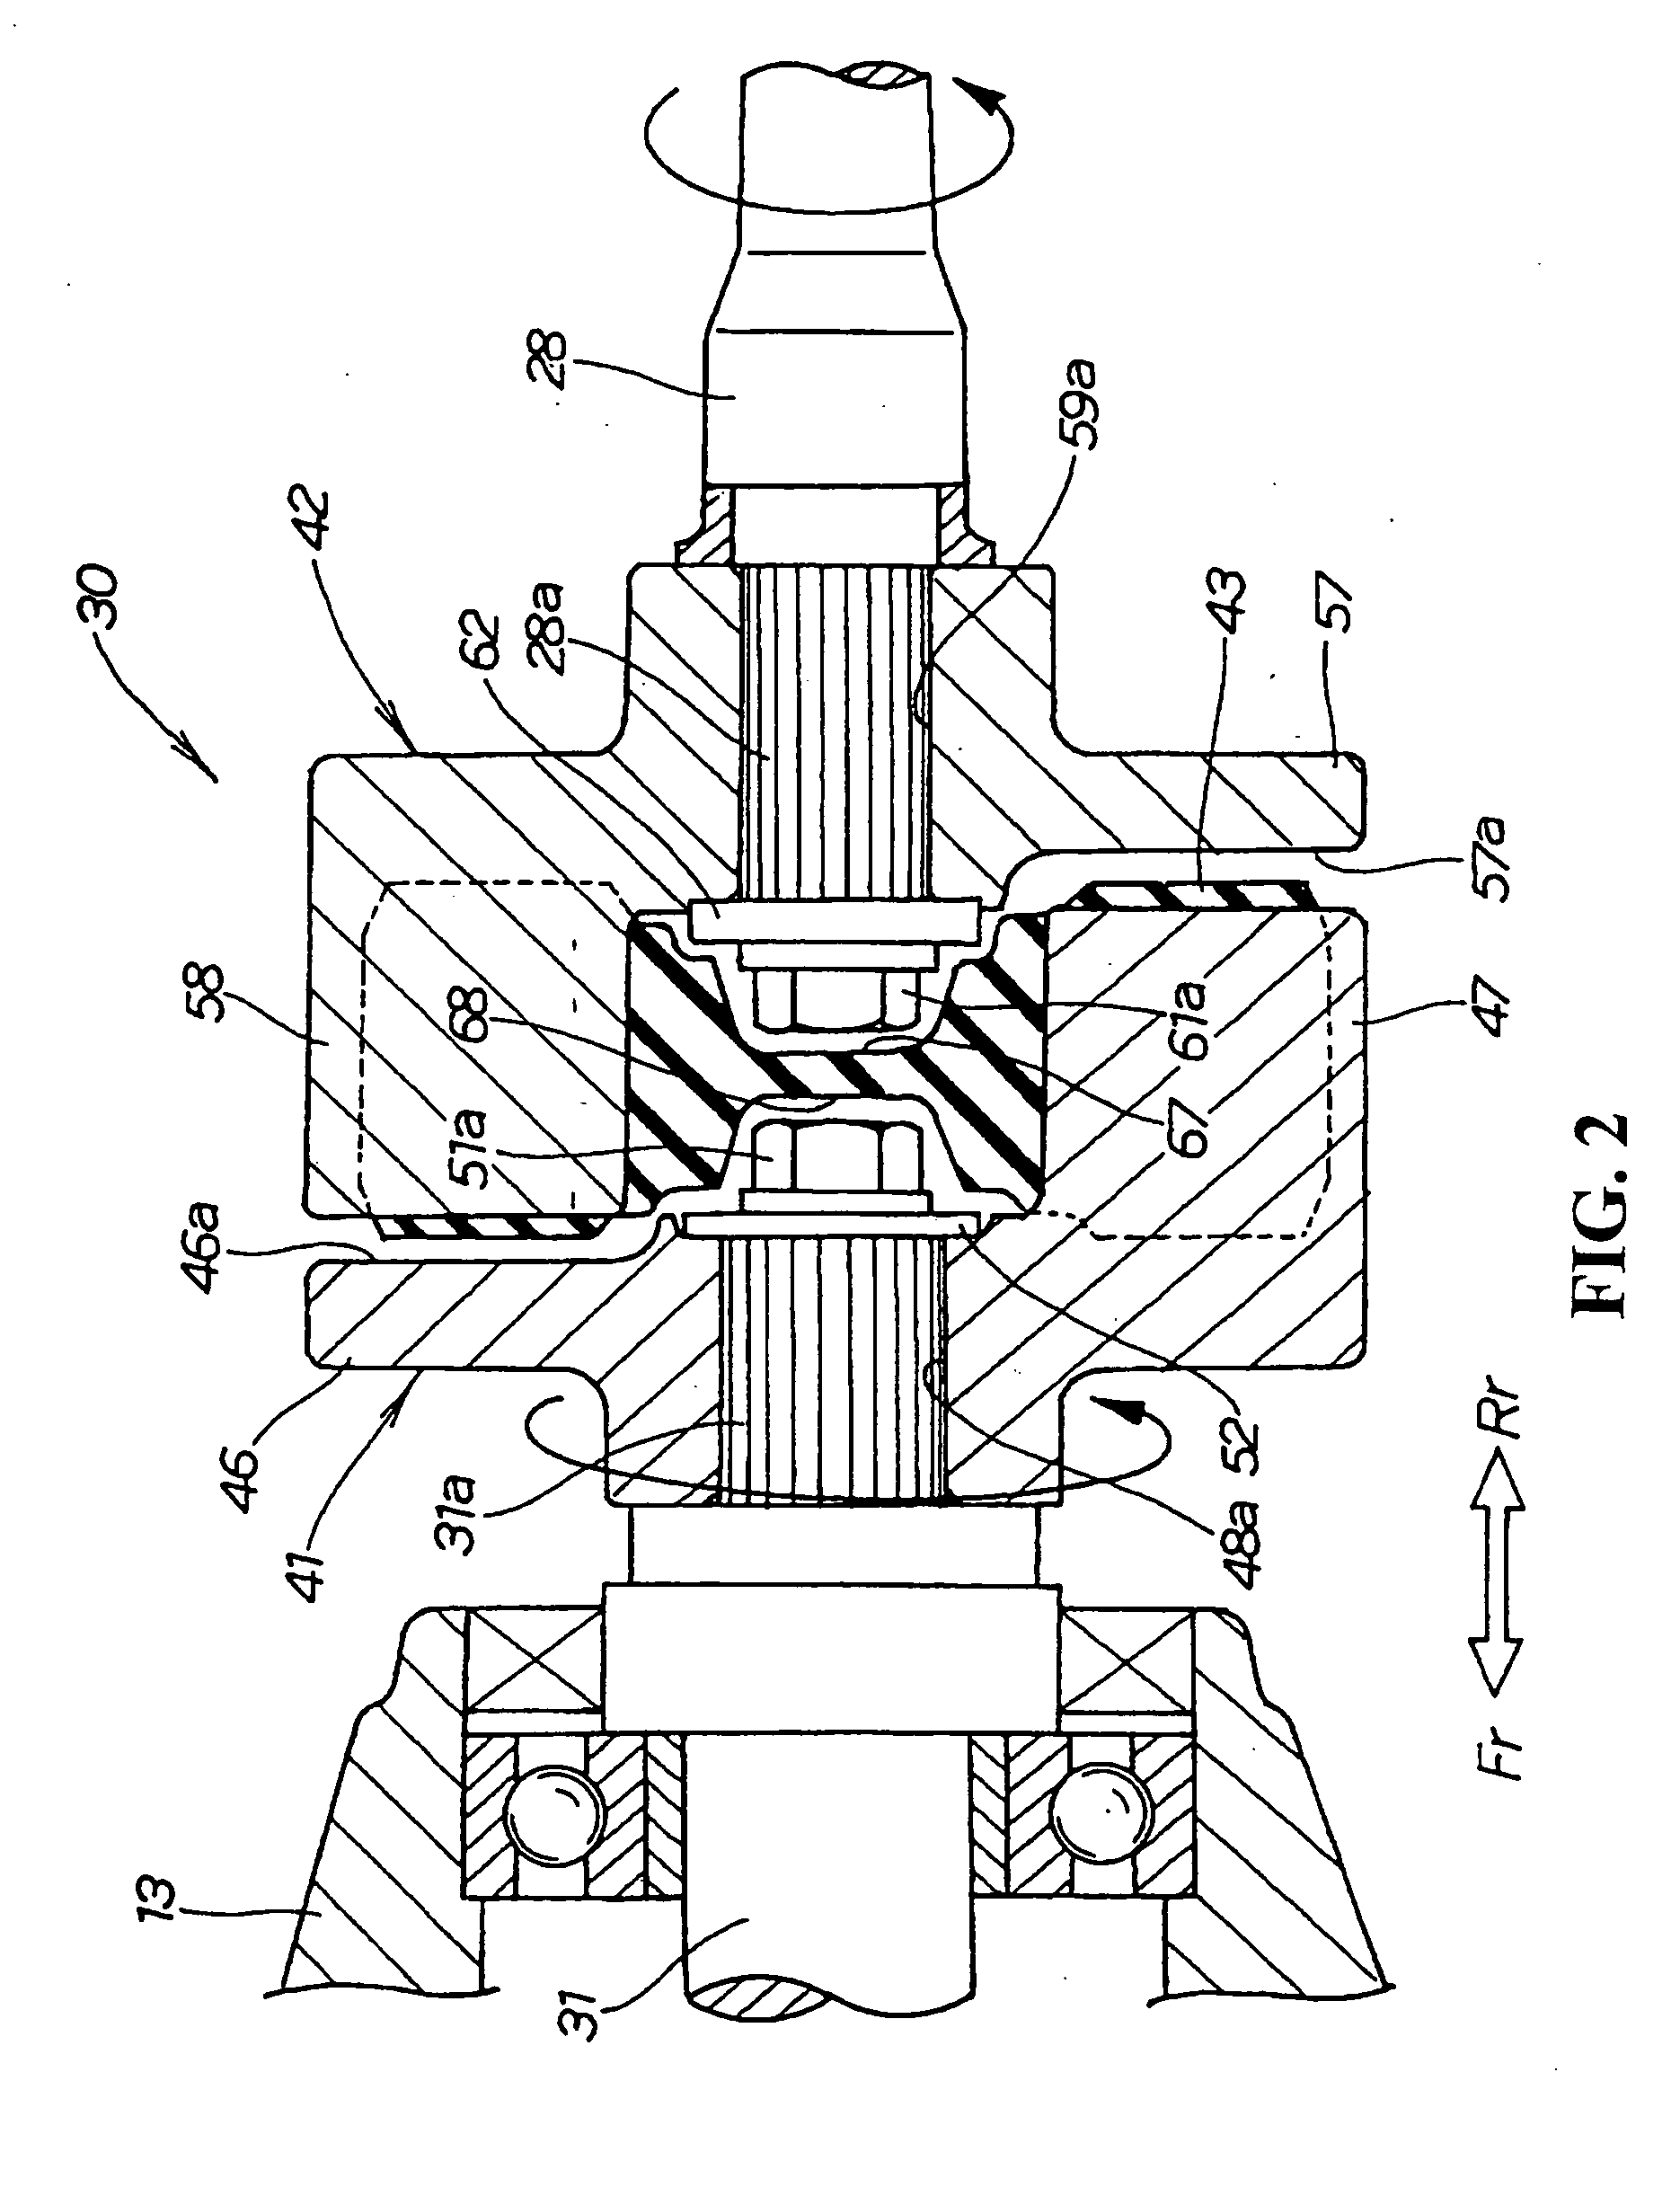 Coupling joint structure of small-sized boat